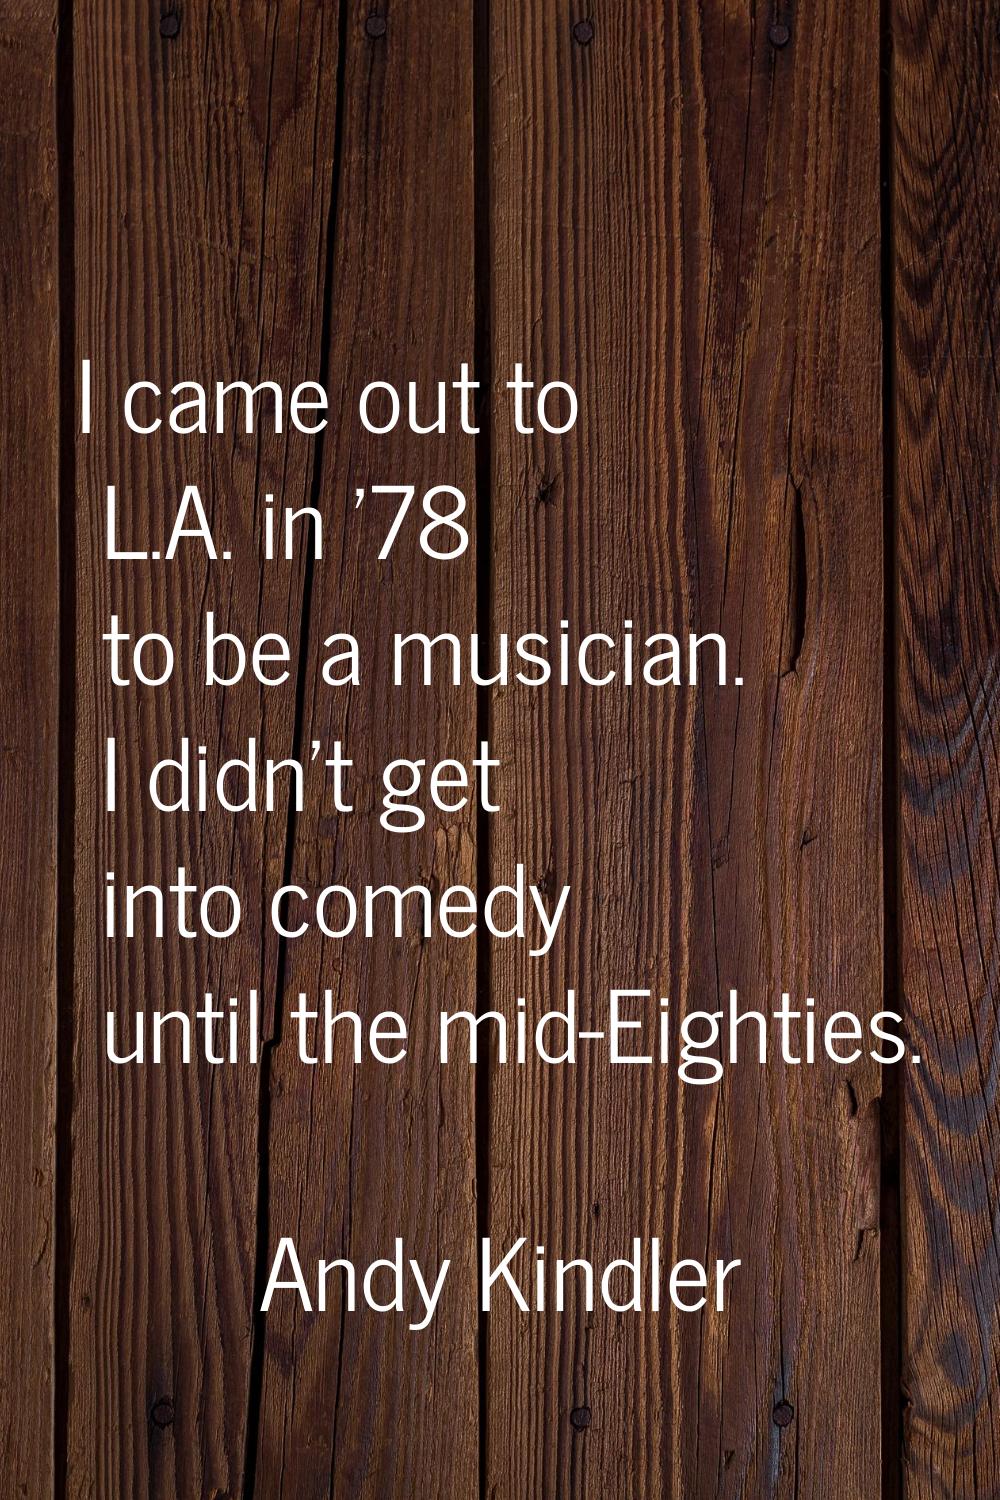 I came out to L.A. in '78 to be a musician. I didn't get into comedy until the mid-Eighties.